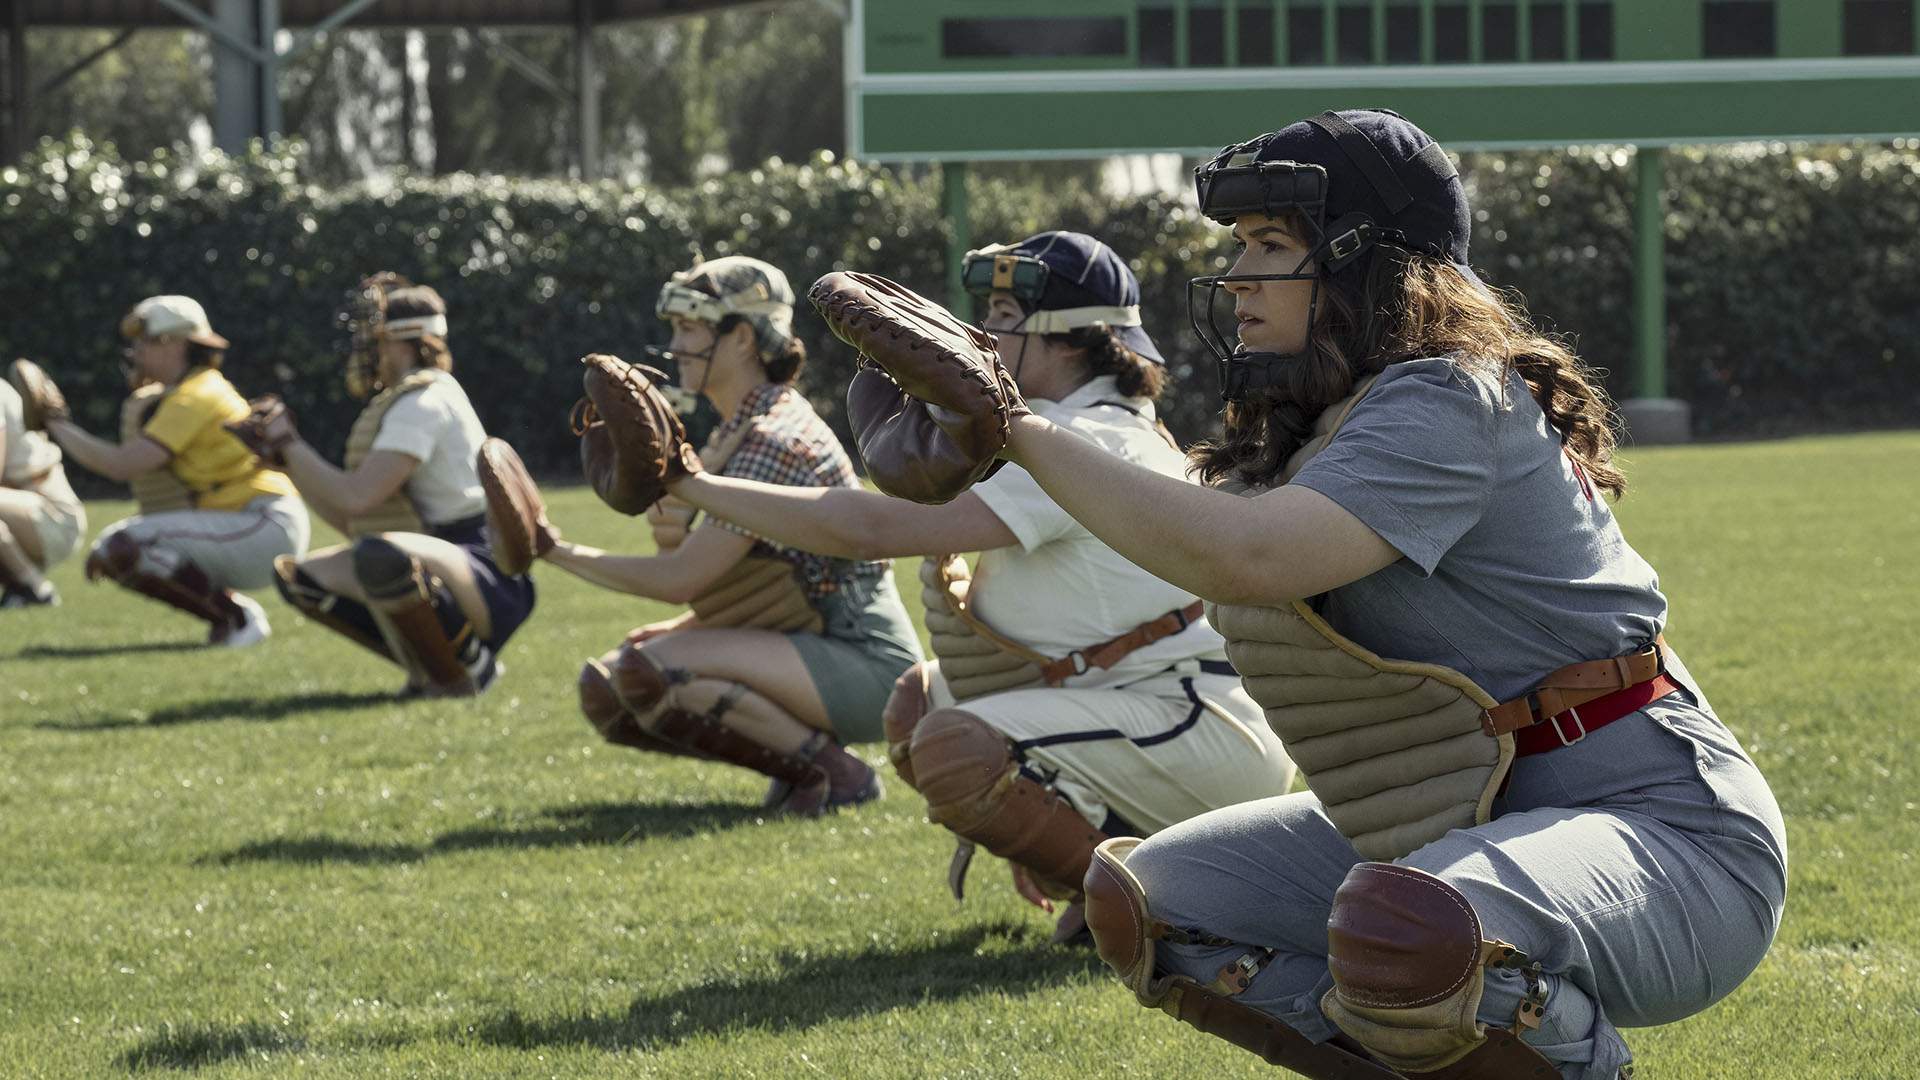 The Must-See New 'A League of Their Own' Series Gives the Beloved 90s Movie a Worthy Extra Innings